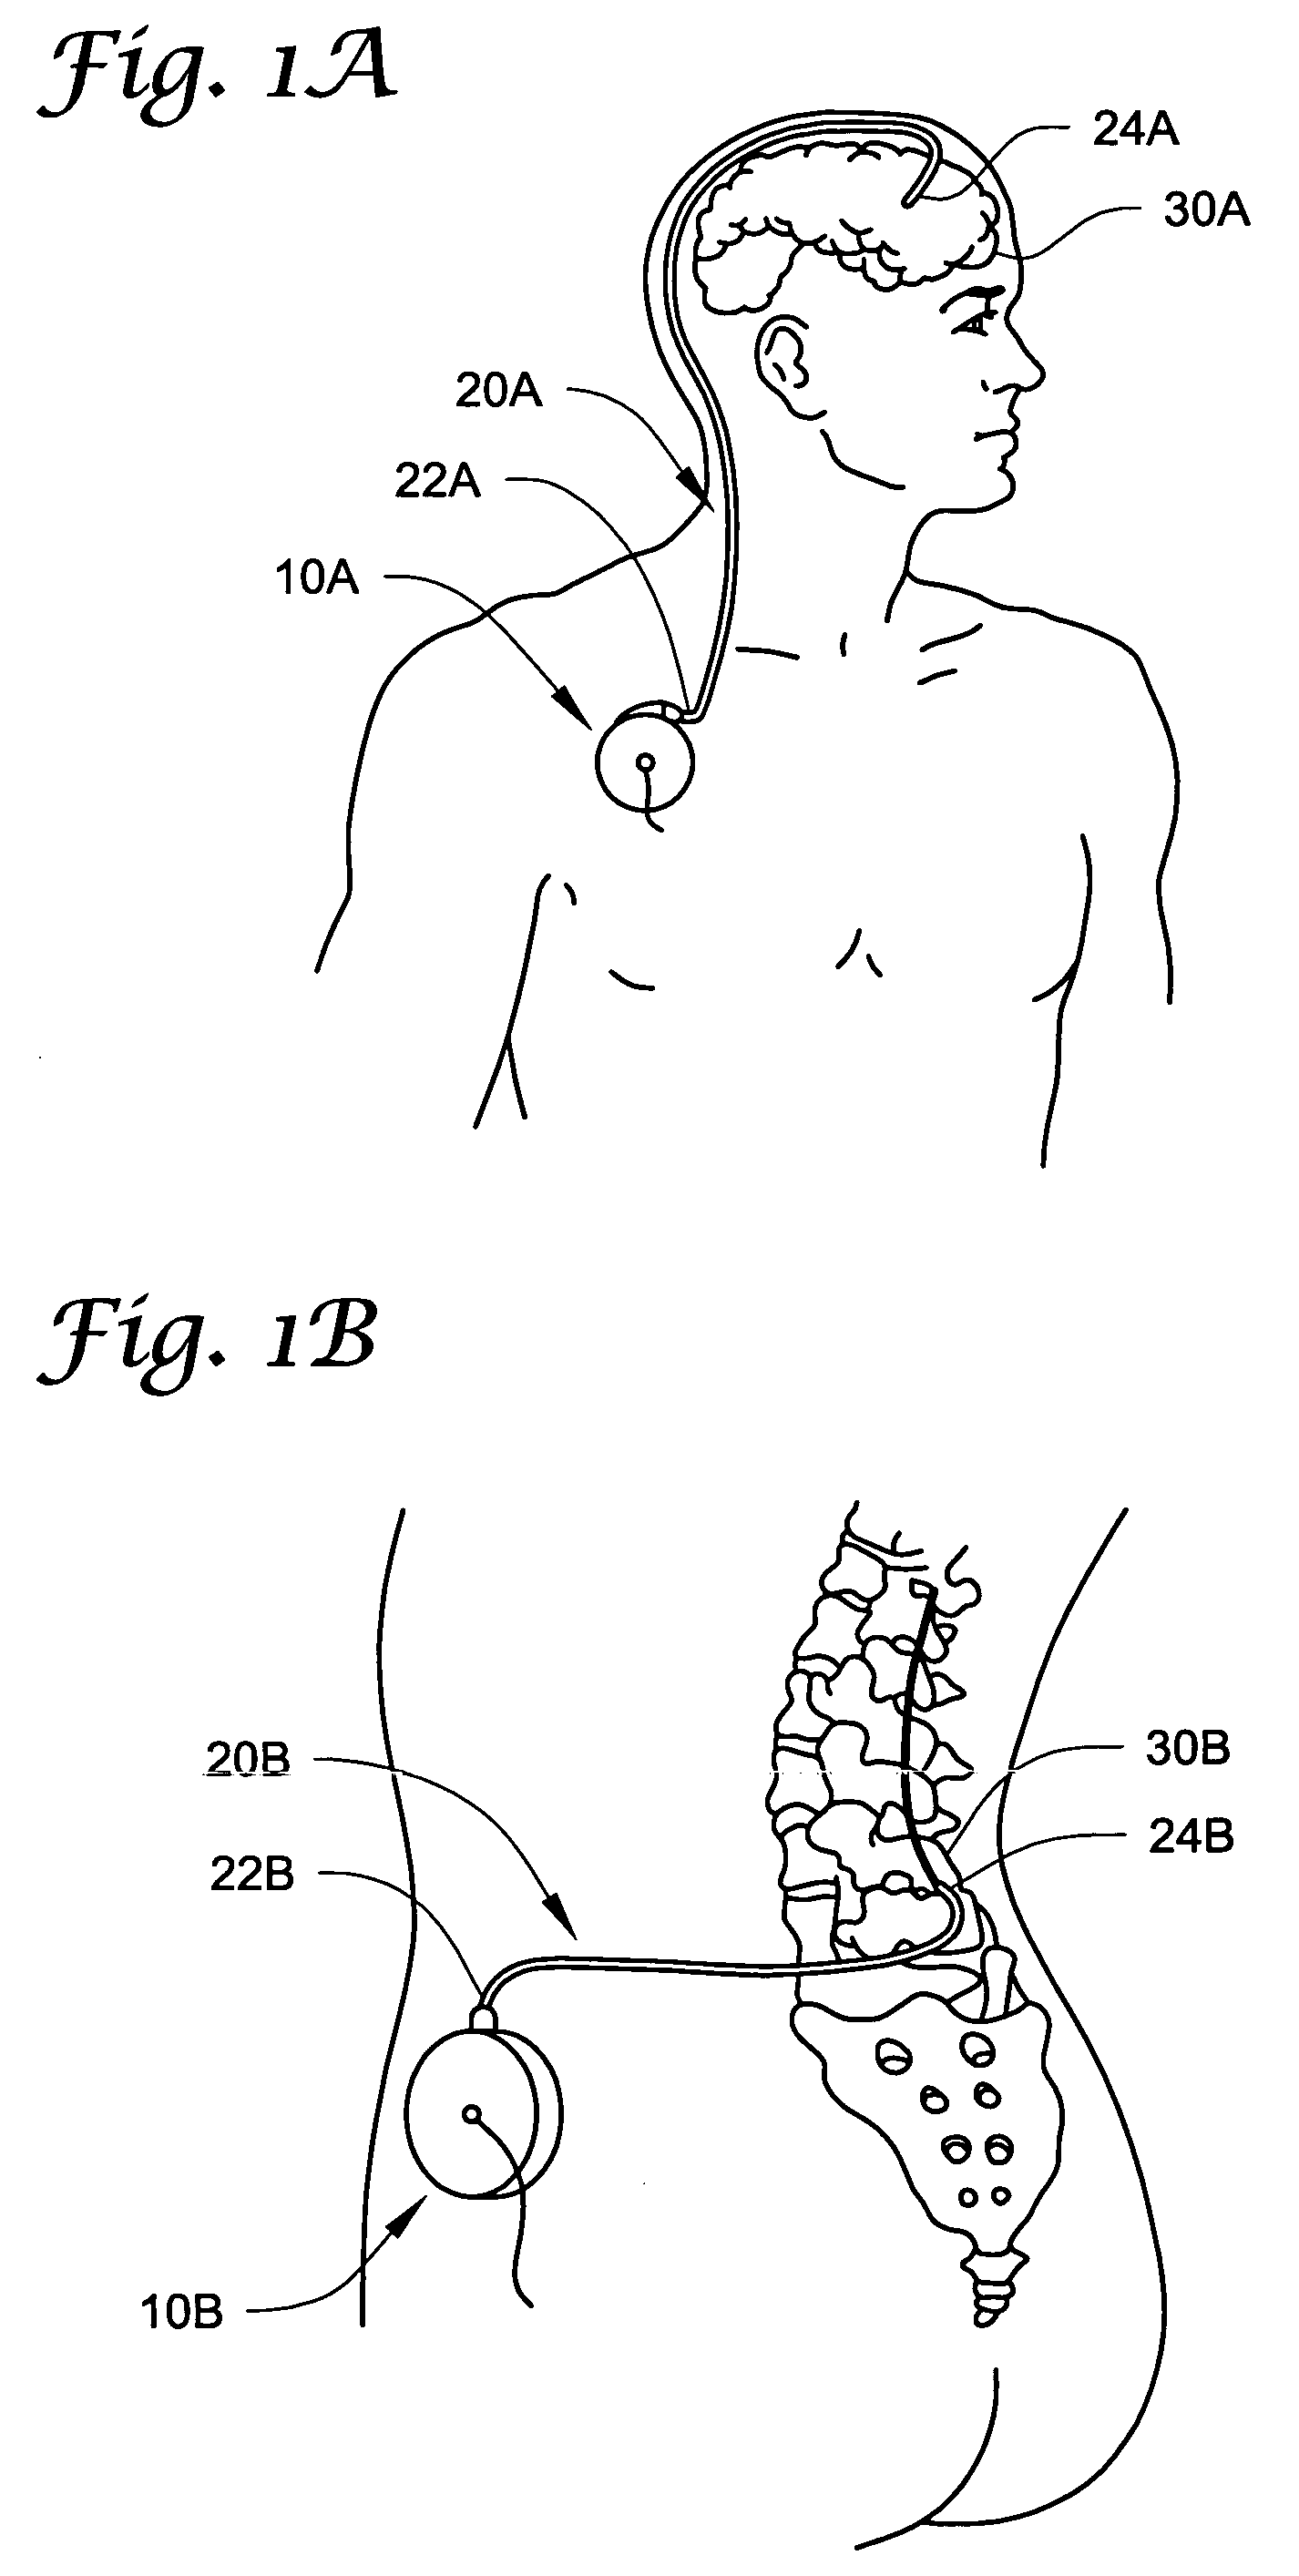 Permeable membrane catheters, systems, and methods